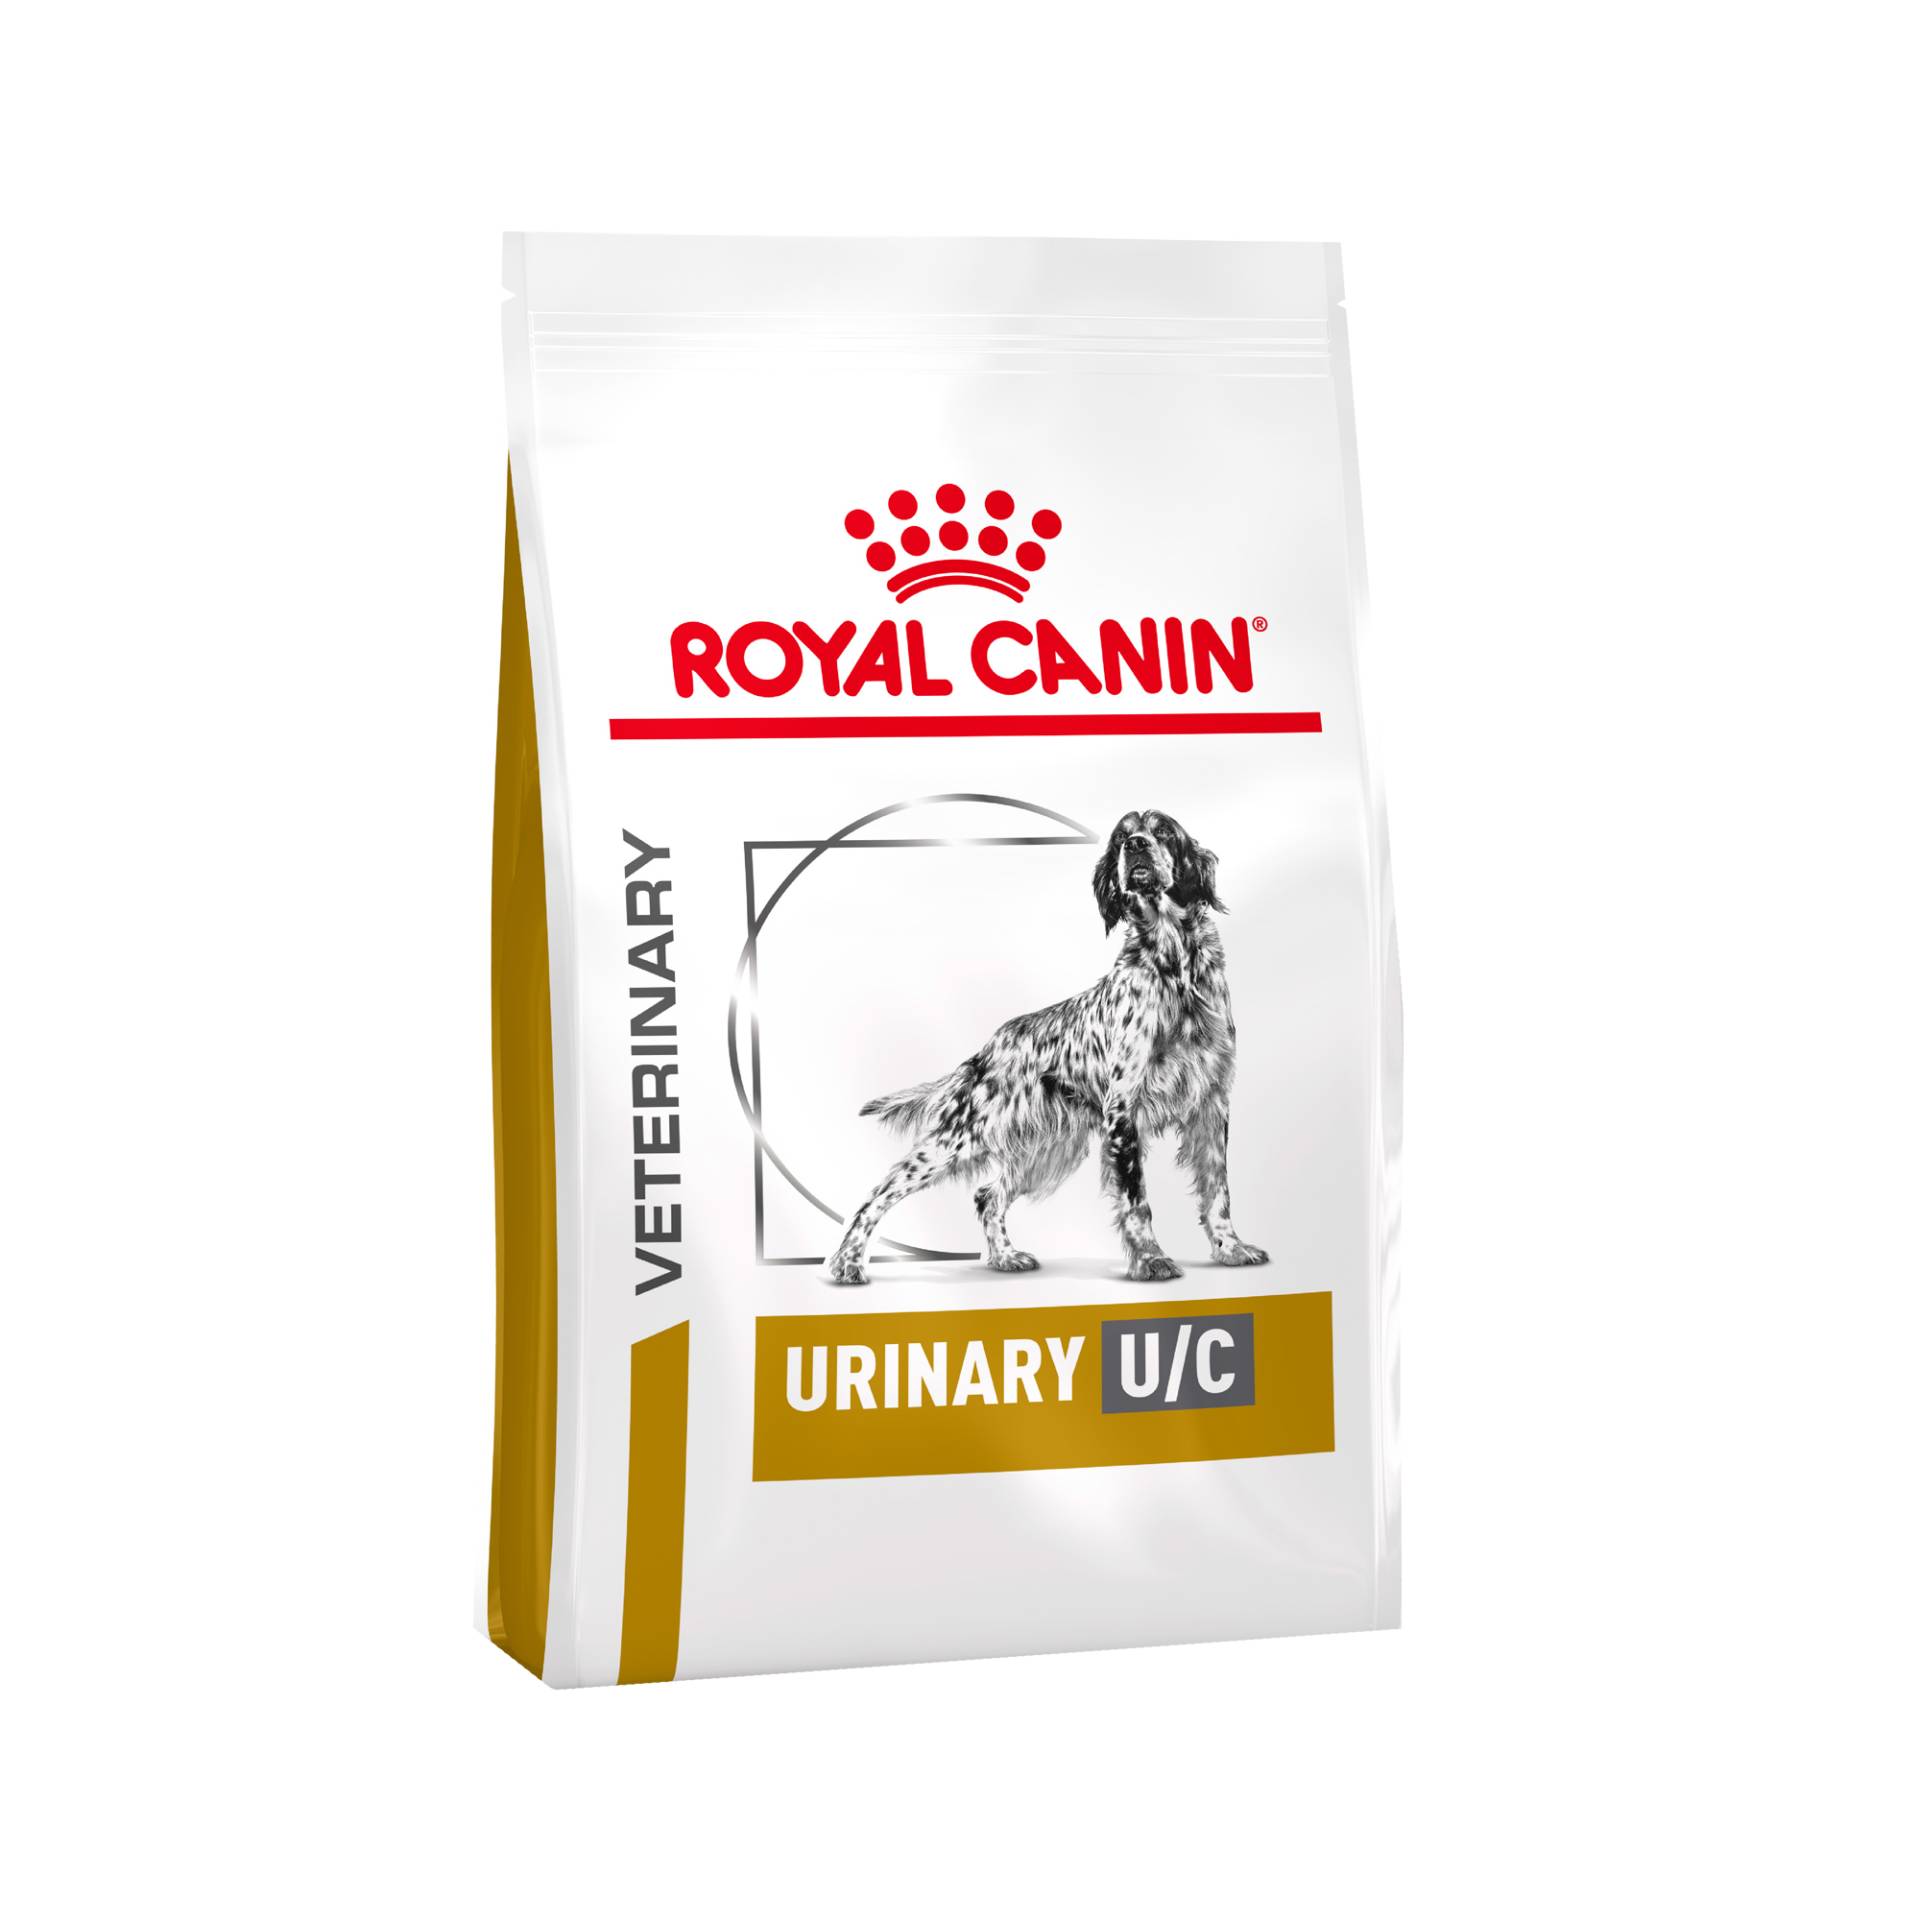 Royal Canin Urinary UC Low Purine (UUC 18) Hundefutter - 7,5 kg von Royal Canin